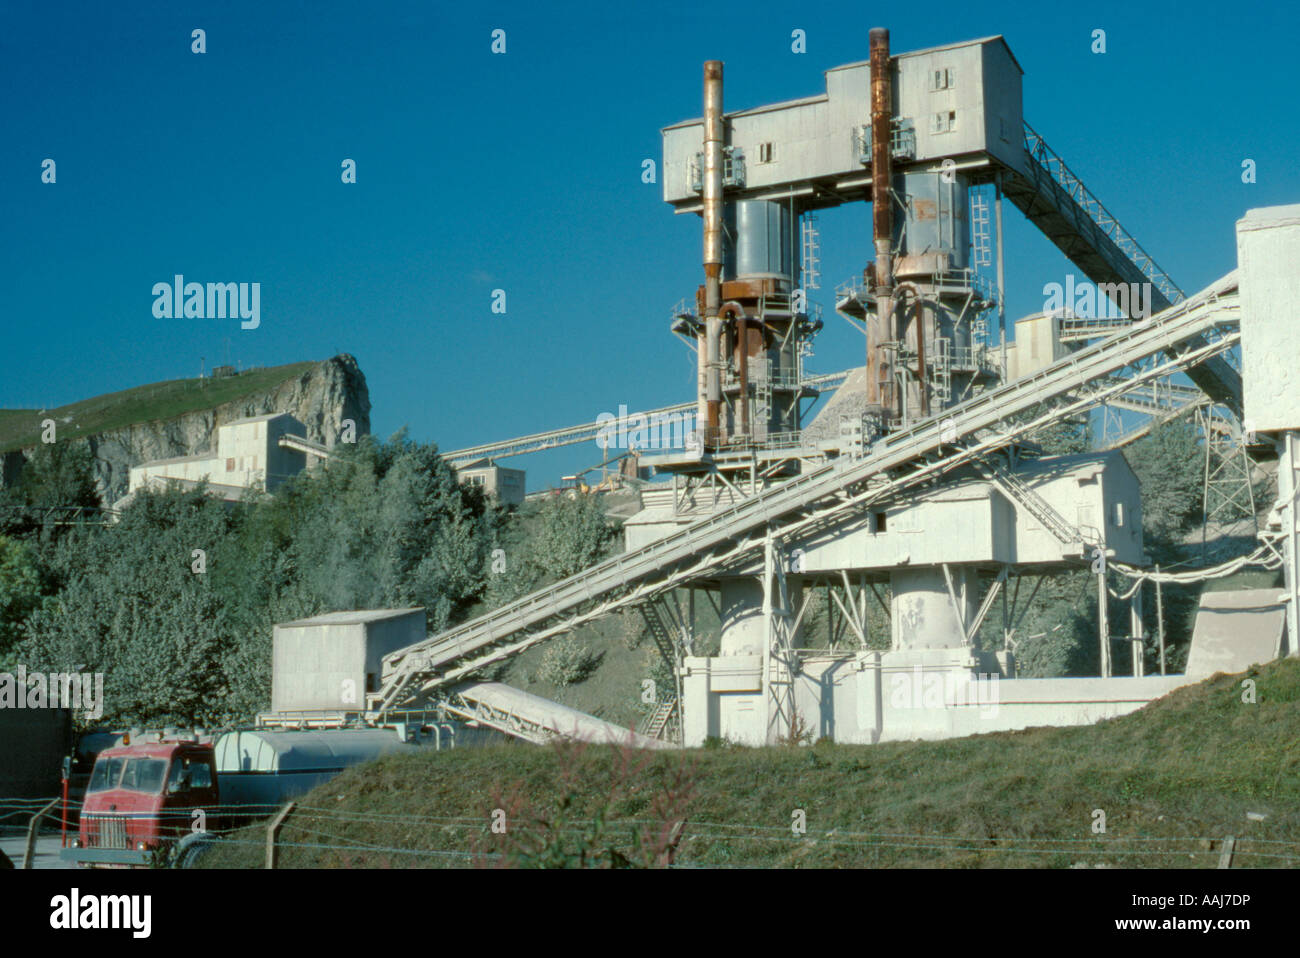 Swindon Cement Works at Cracoe, north of Skipton, Yorkshire Dales National Park, North Yorkshire, England, UK. Stock Photo